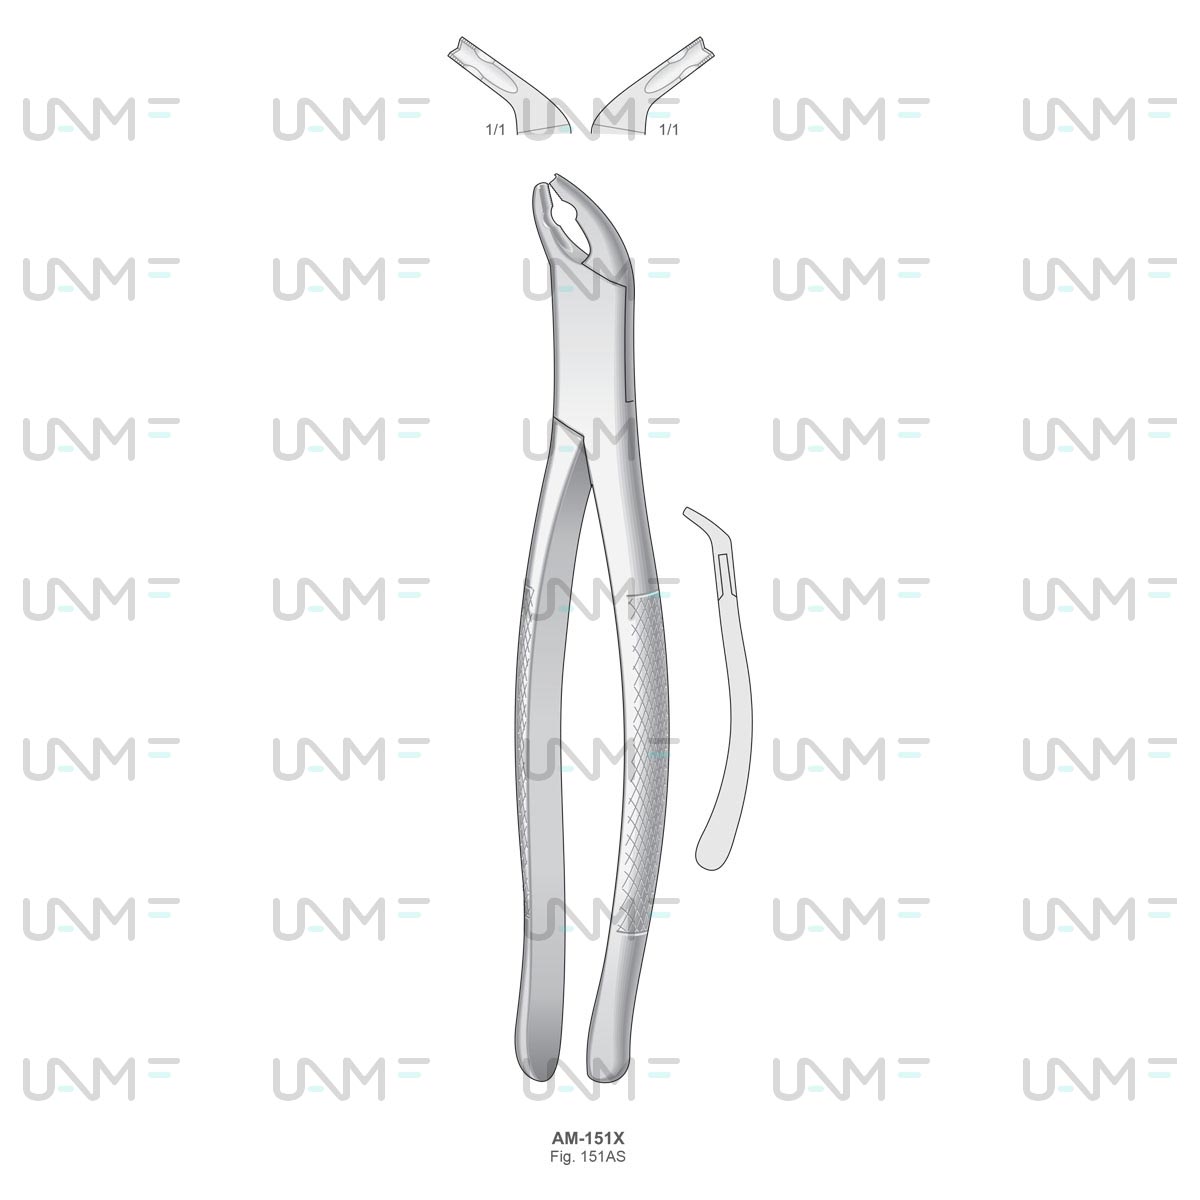 Extraction Forceps,American Pattern